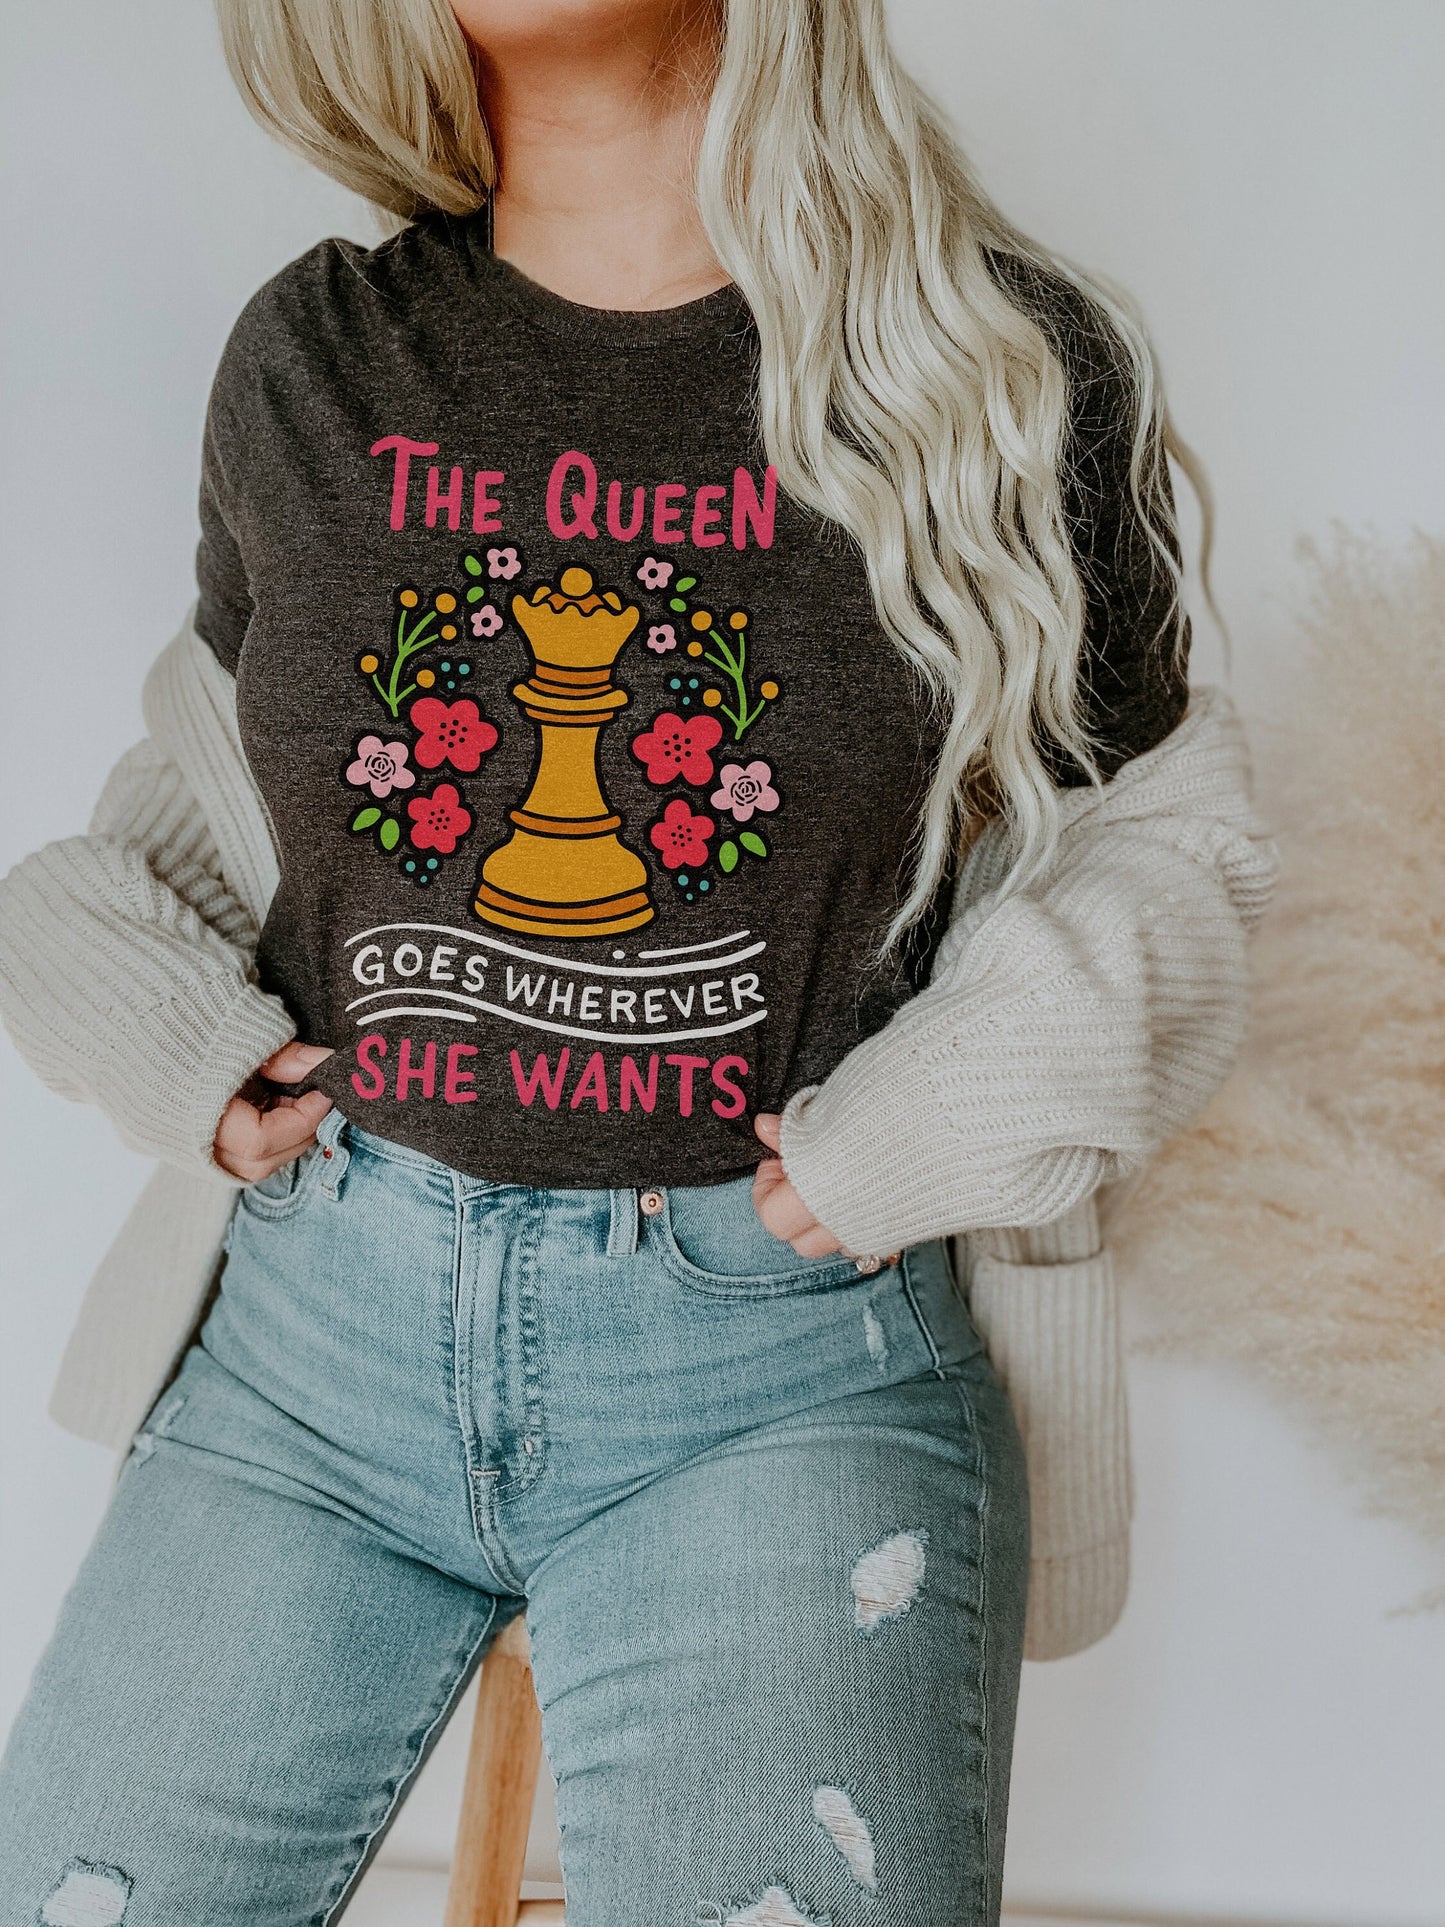 The Queen Can Go Wherever She Wants Queen Chess Shirt Ultra Soft Graphic Tee Unisex Soft Tee T-shirt for Women or Men